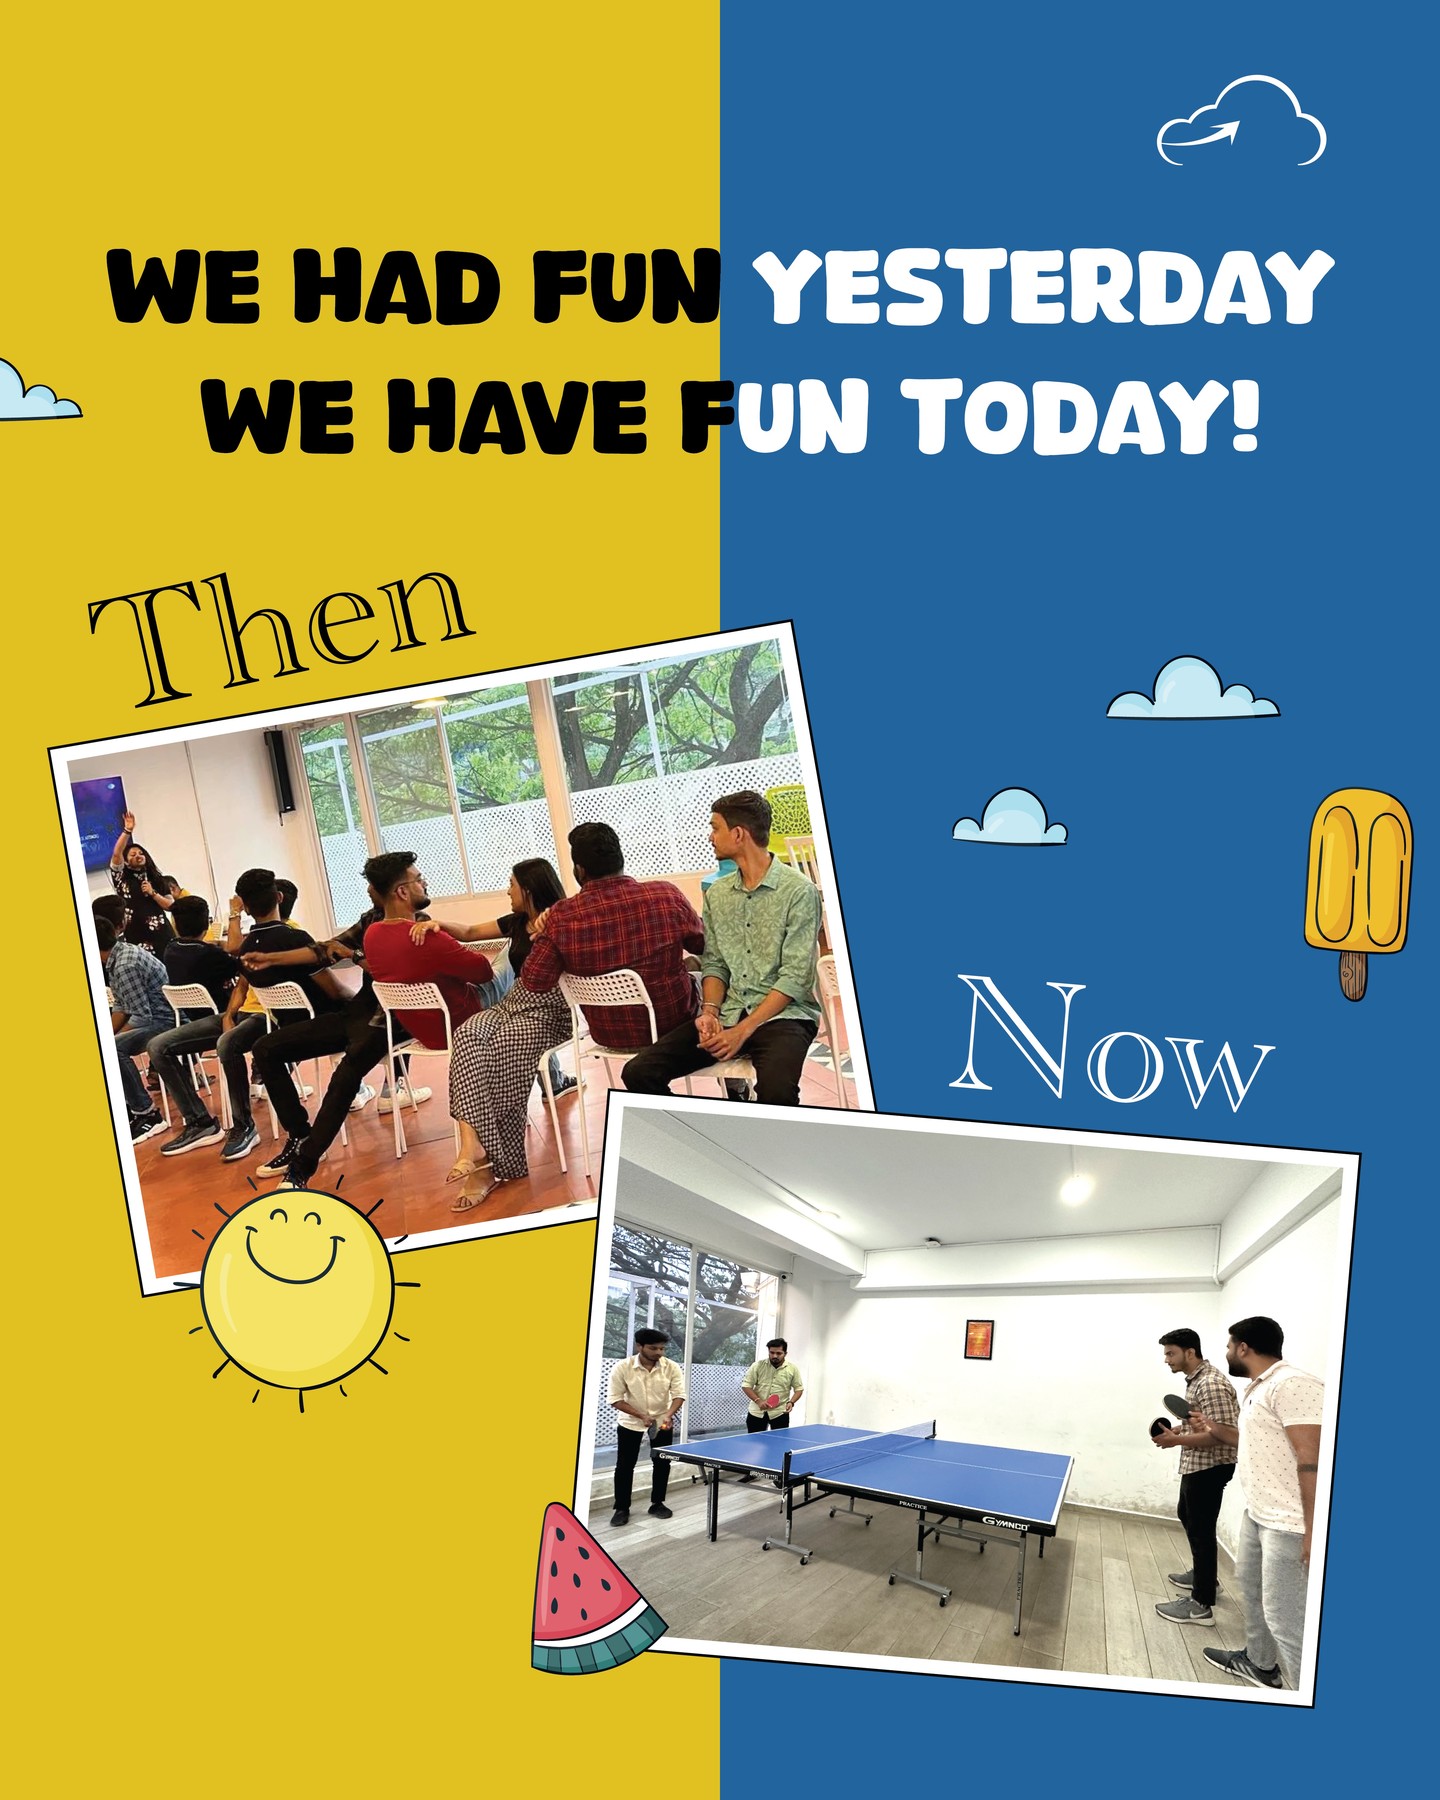 Our memories remind us of all the fun we had together back then.
And you know what? The fun isn't over yet! We're still all about having a good time and making memories together, even now.

#throwback #employeeengagement #employeemotivation #officefun #officememories